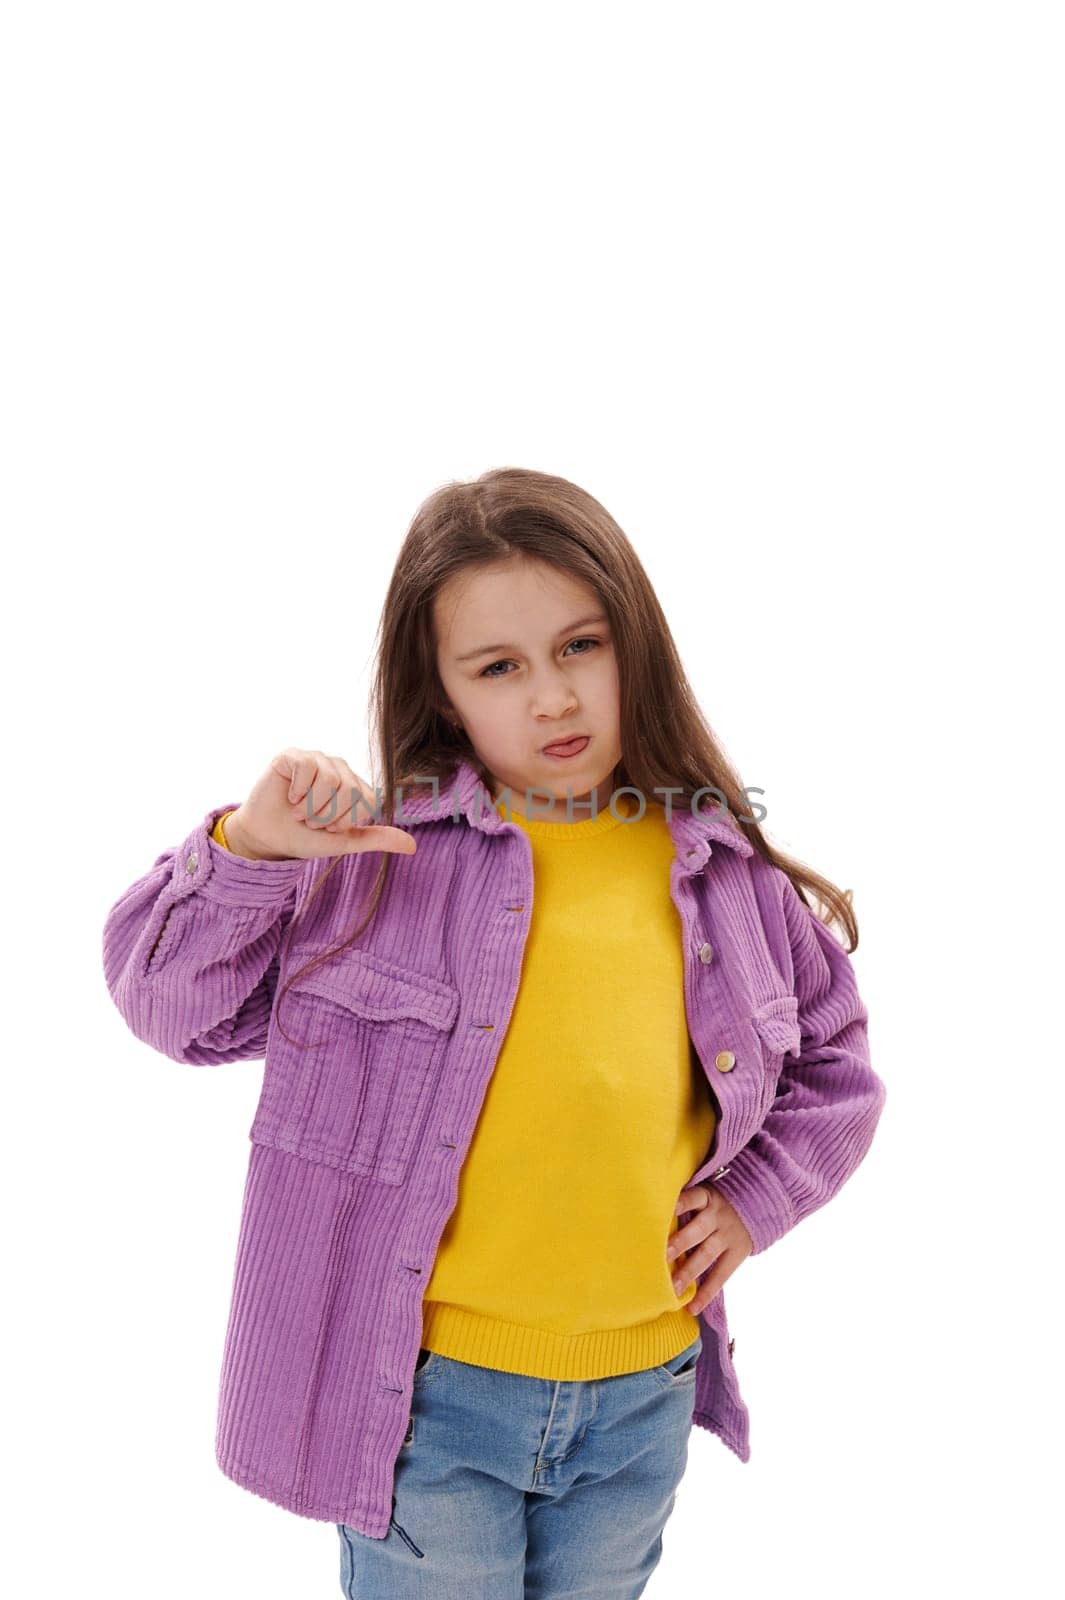 Mischievous 5-6 years little child girl gestures with thumbs down, makes faces, grimaces, shows her tongue looking at camera, expressing misunderstanding and disagreement, isolated on white background